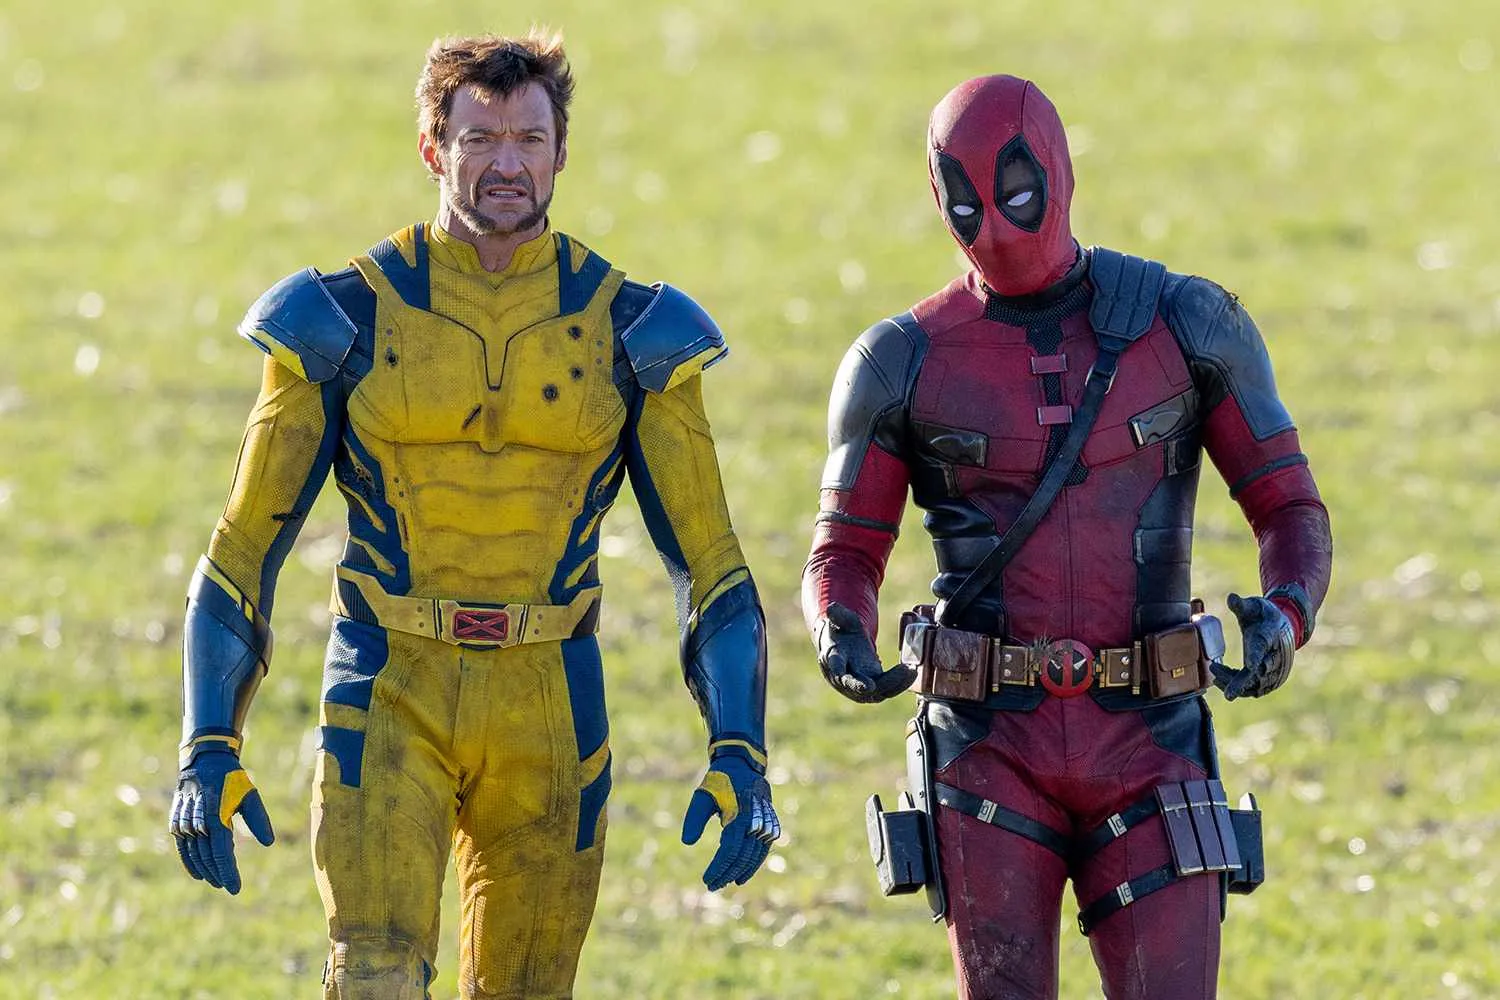 Deadpool & Wolverine New Trailer: Cast, Release Date, and All You Need To Know